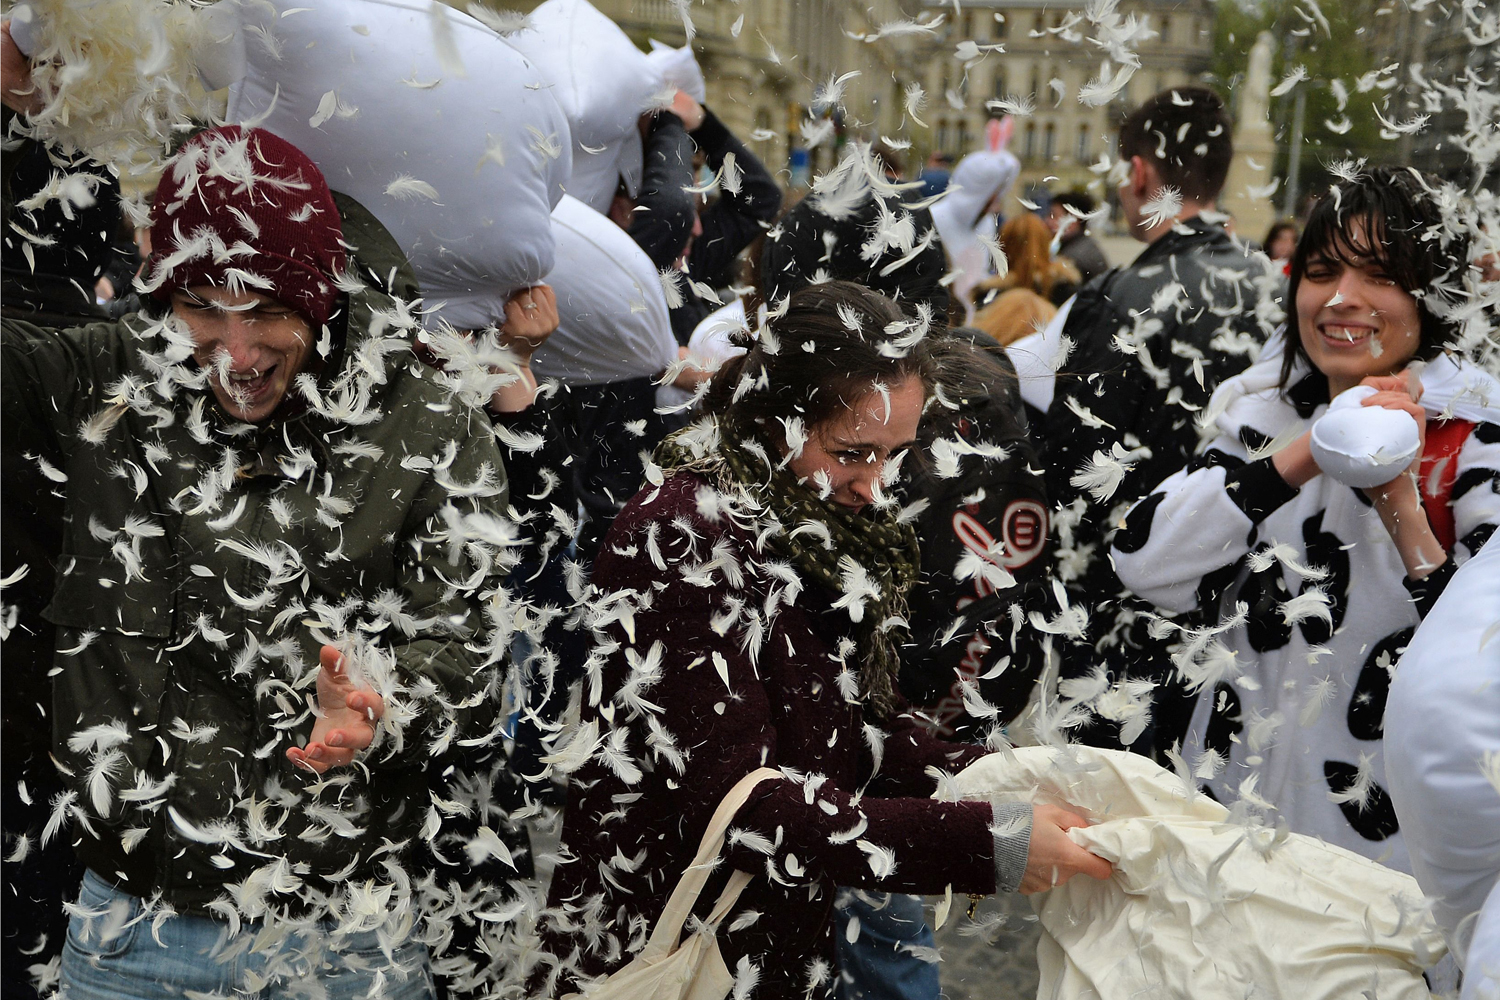 Apr. 5, 2014. People fight with pillows at the University's Square on World Pillow Fight Day 2014 in Bucharest.